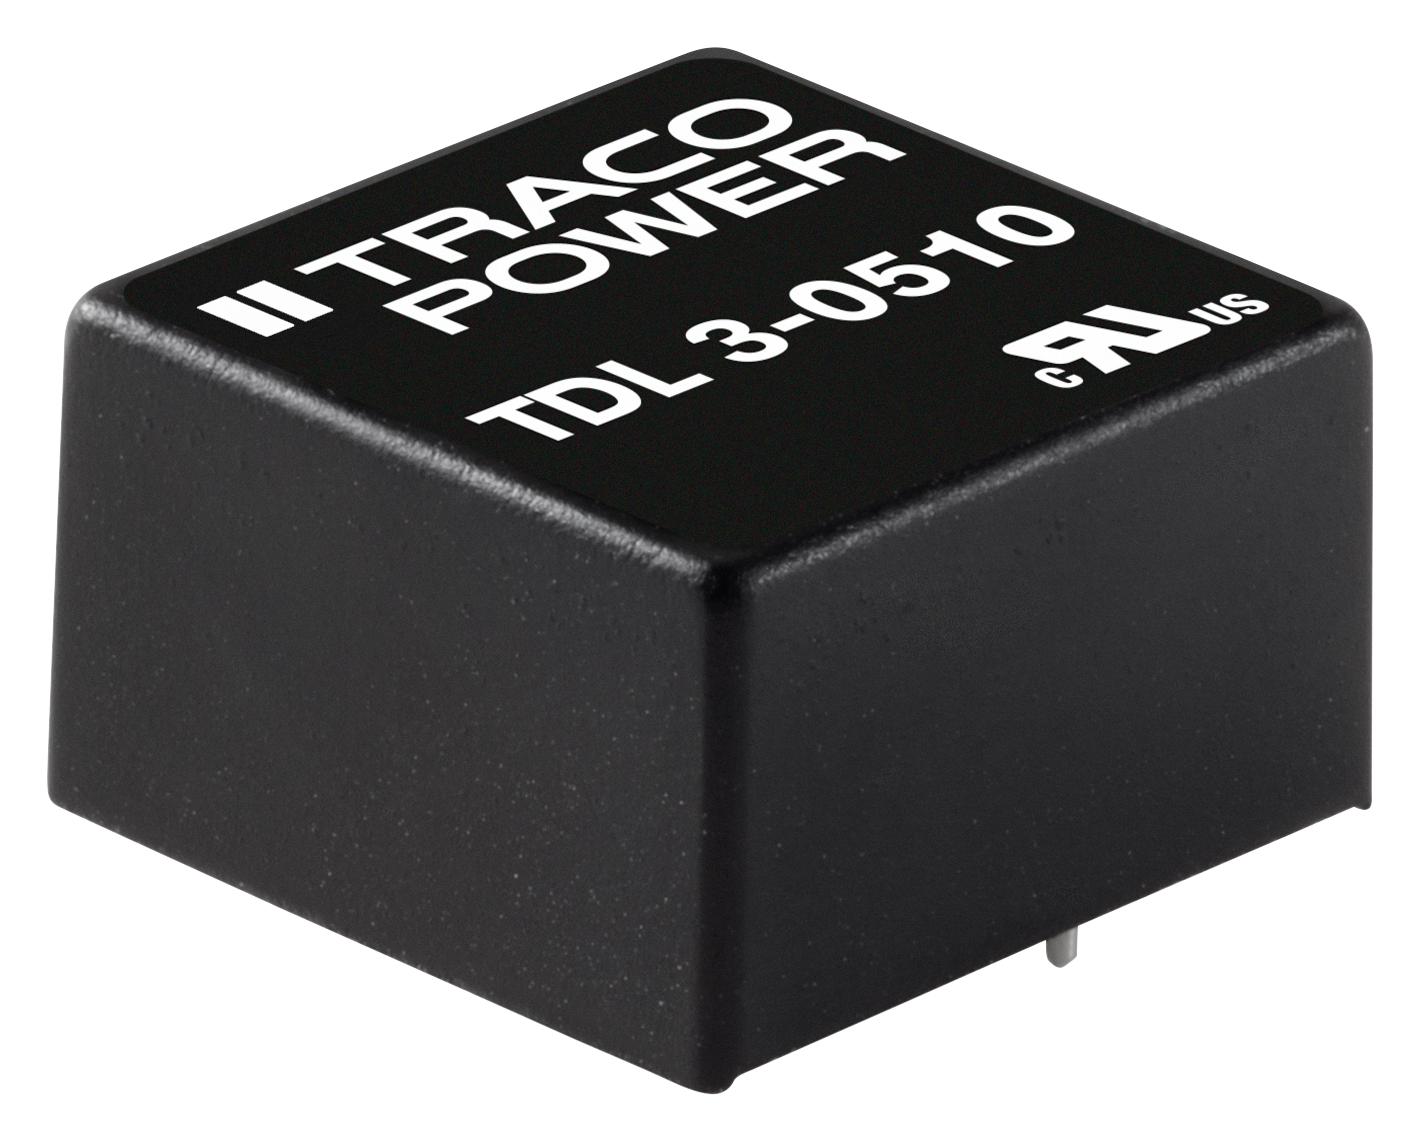 TDL 3-4823 DC-DC CONVERTER, 2 O/P, 3W TRACO POWER